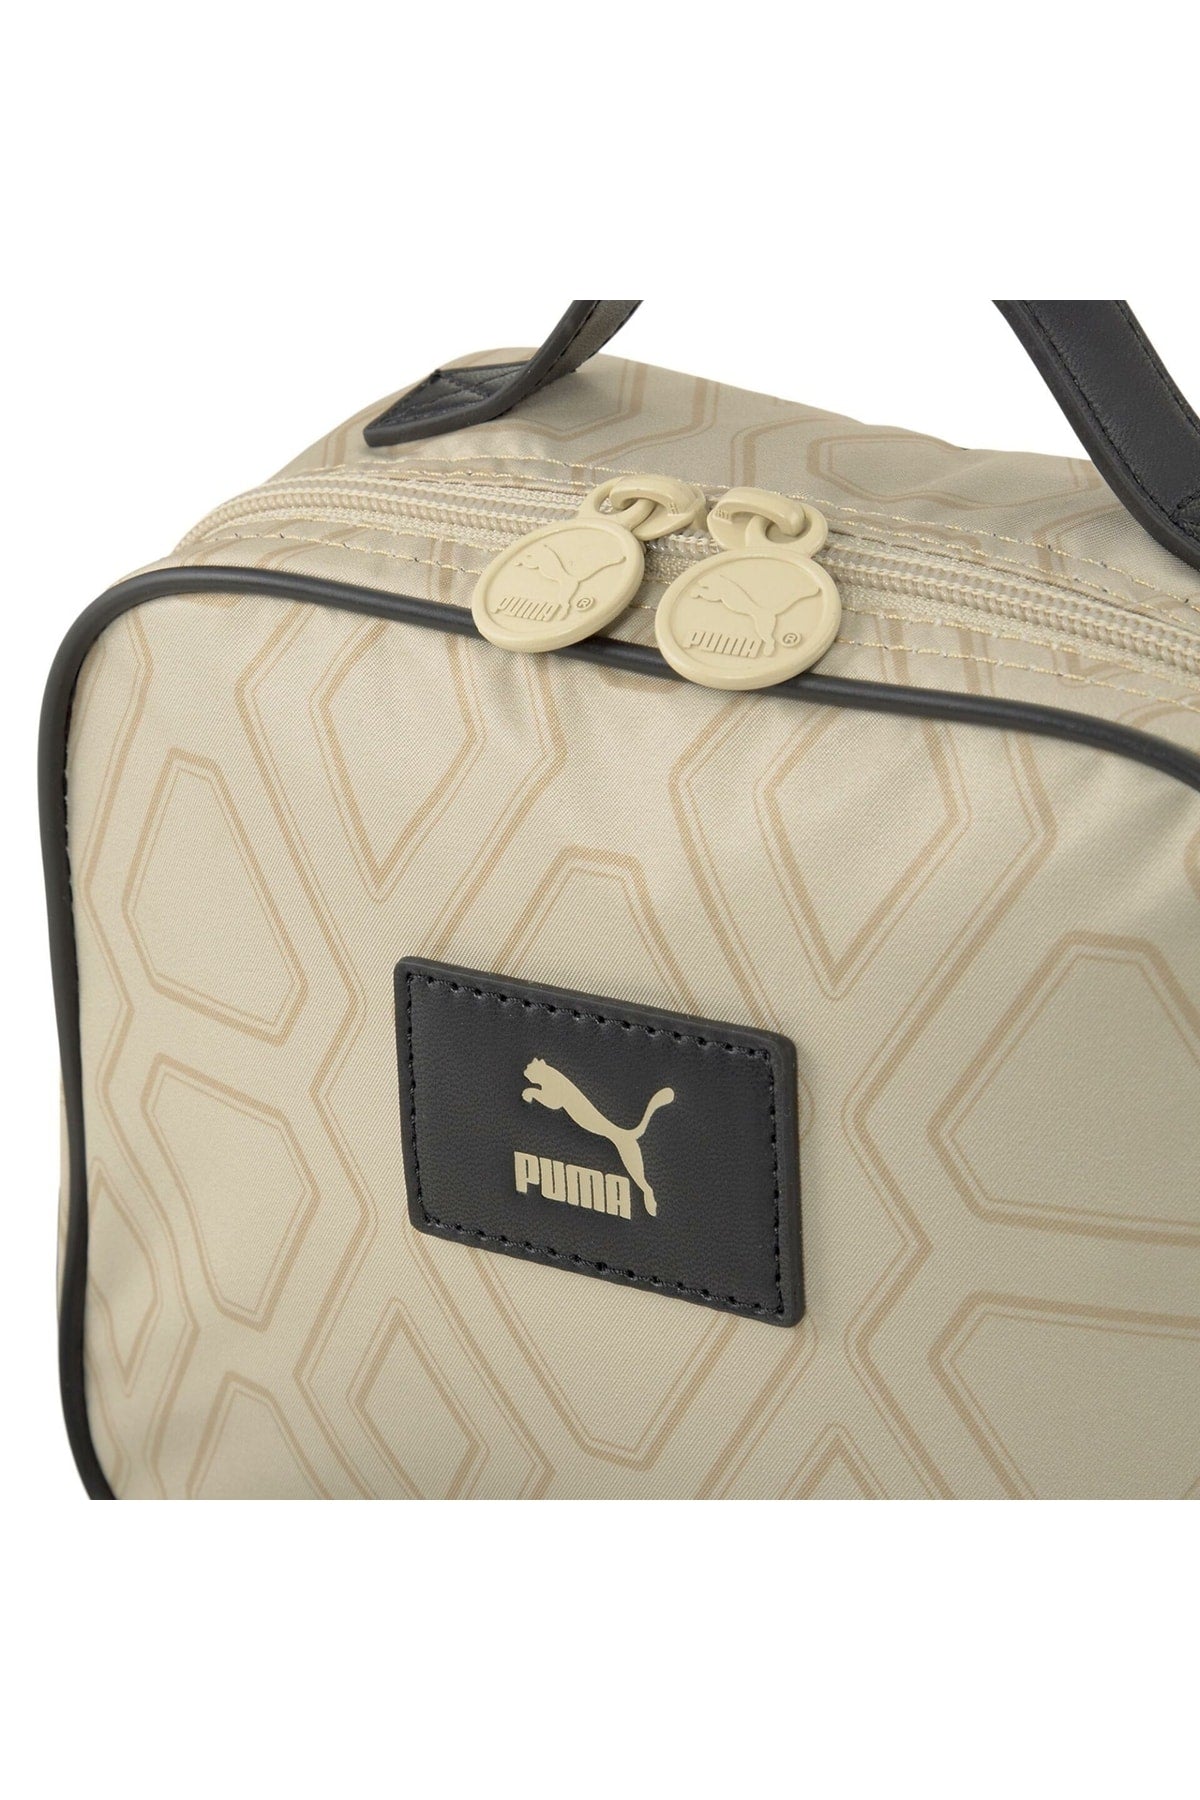 Prime Classic Archive Women's Hand And Shoulder Bag Cream 07949202